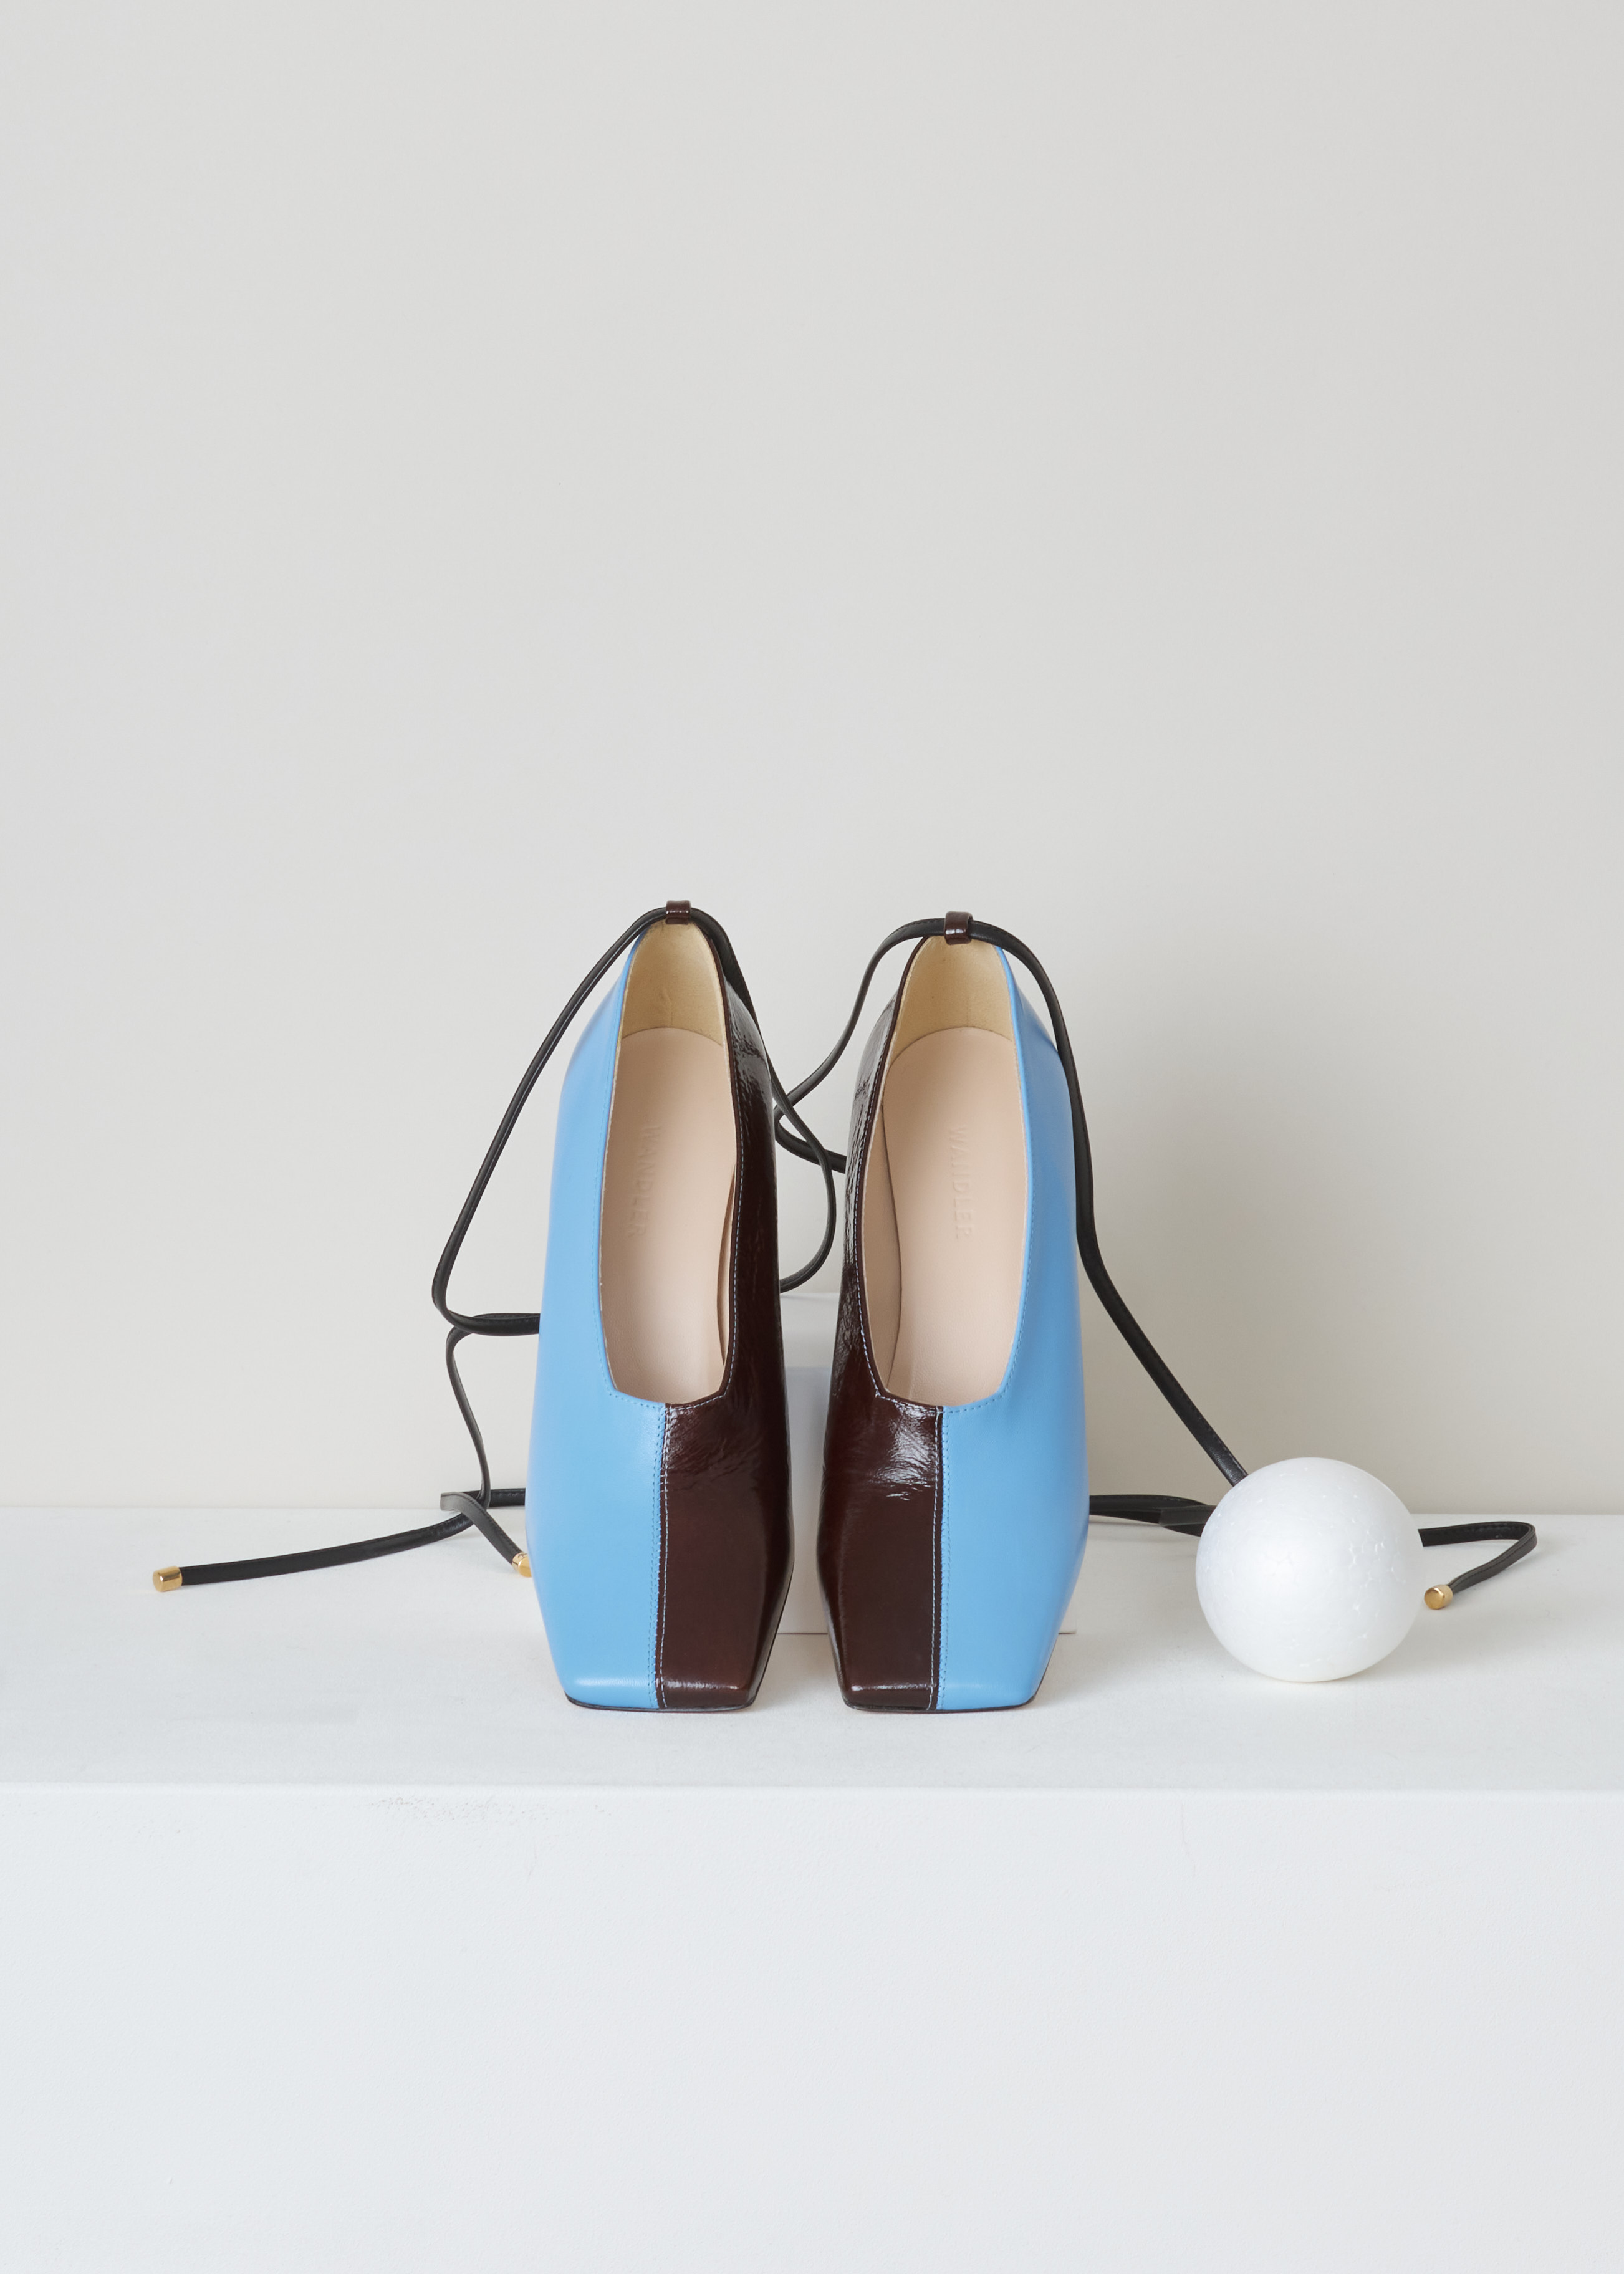 Wandler Isa mule ISA_MULE_RAISIN_MIX raisin mix top. Isa mule in raisin mix with a bold architectural shape, a chic square toe, half blue, half brown. It has a wrap tie ankle fastening and high block heel.

Heel height: 8.5 cm / 3.4 inch.